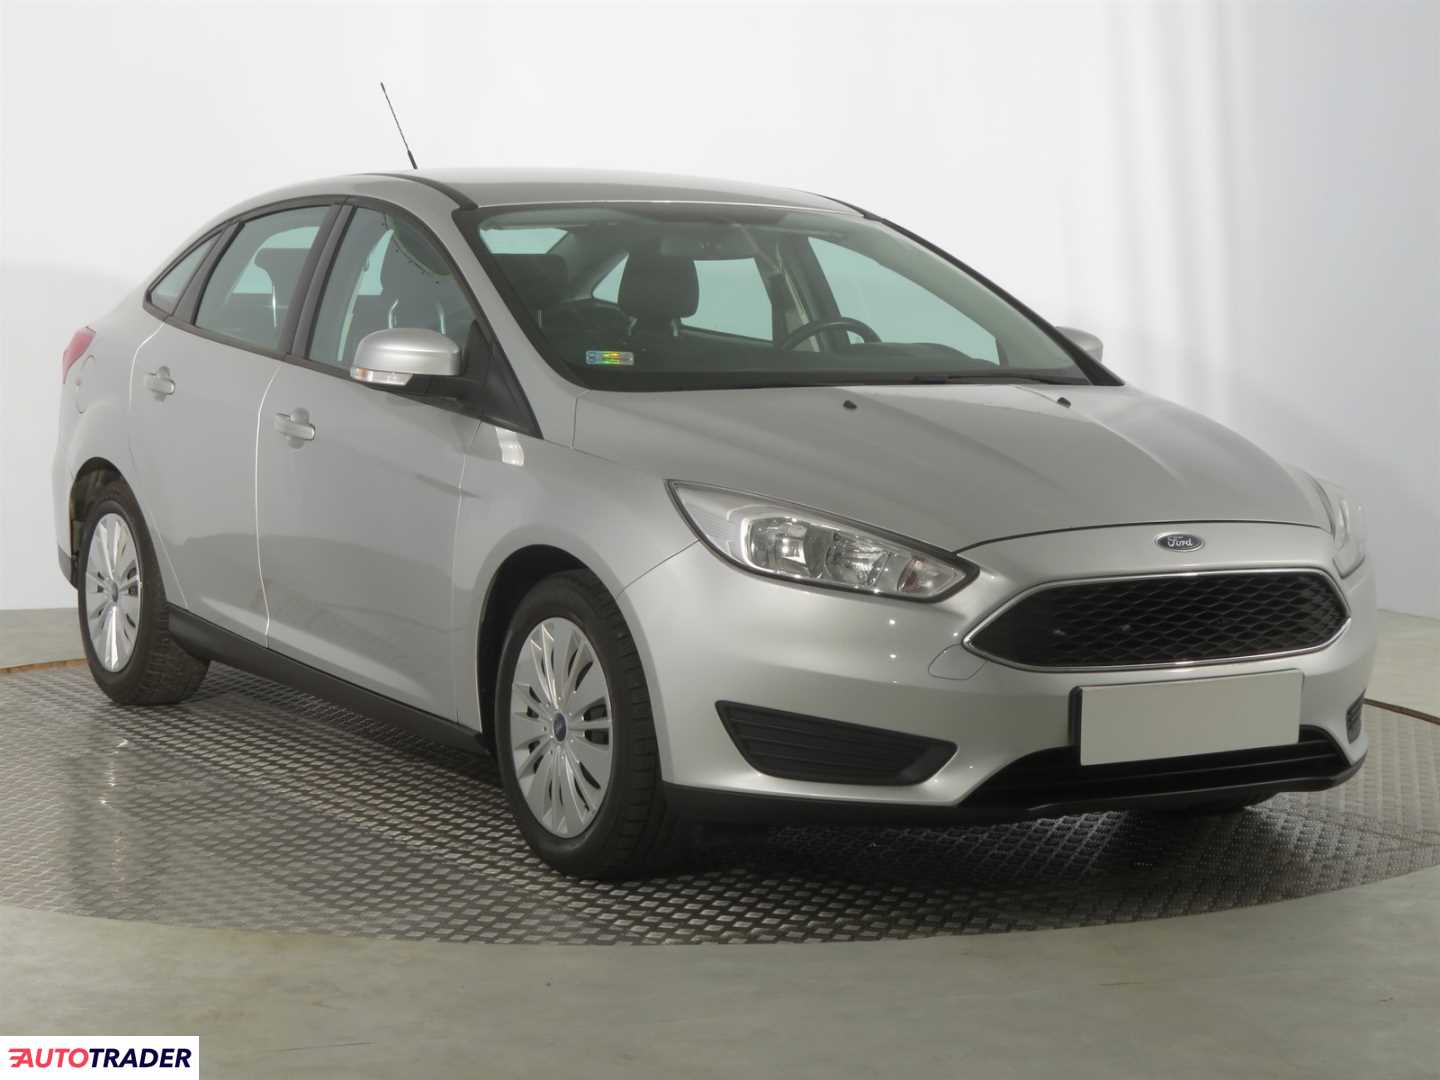 Ford Focus 2017 1.6 103 KM